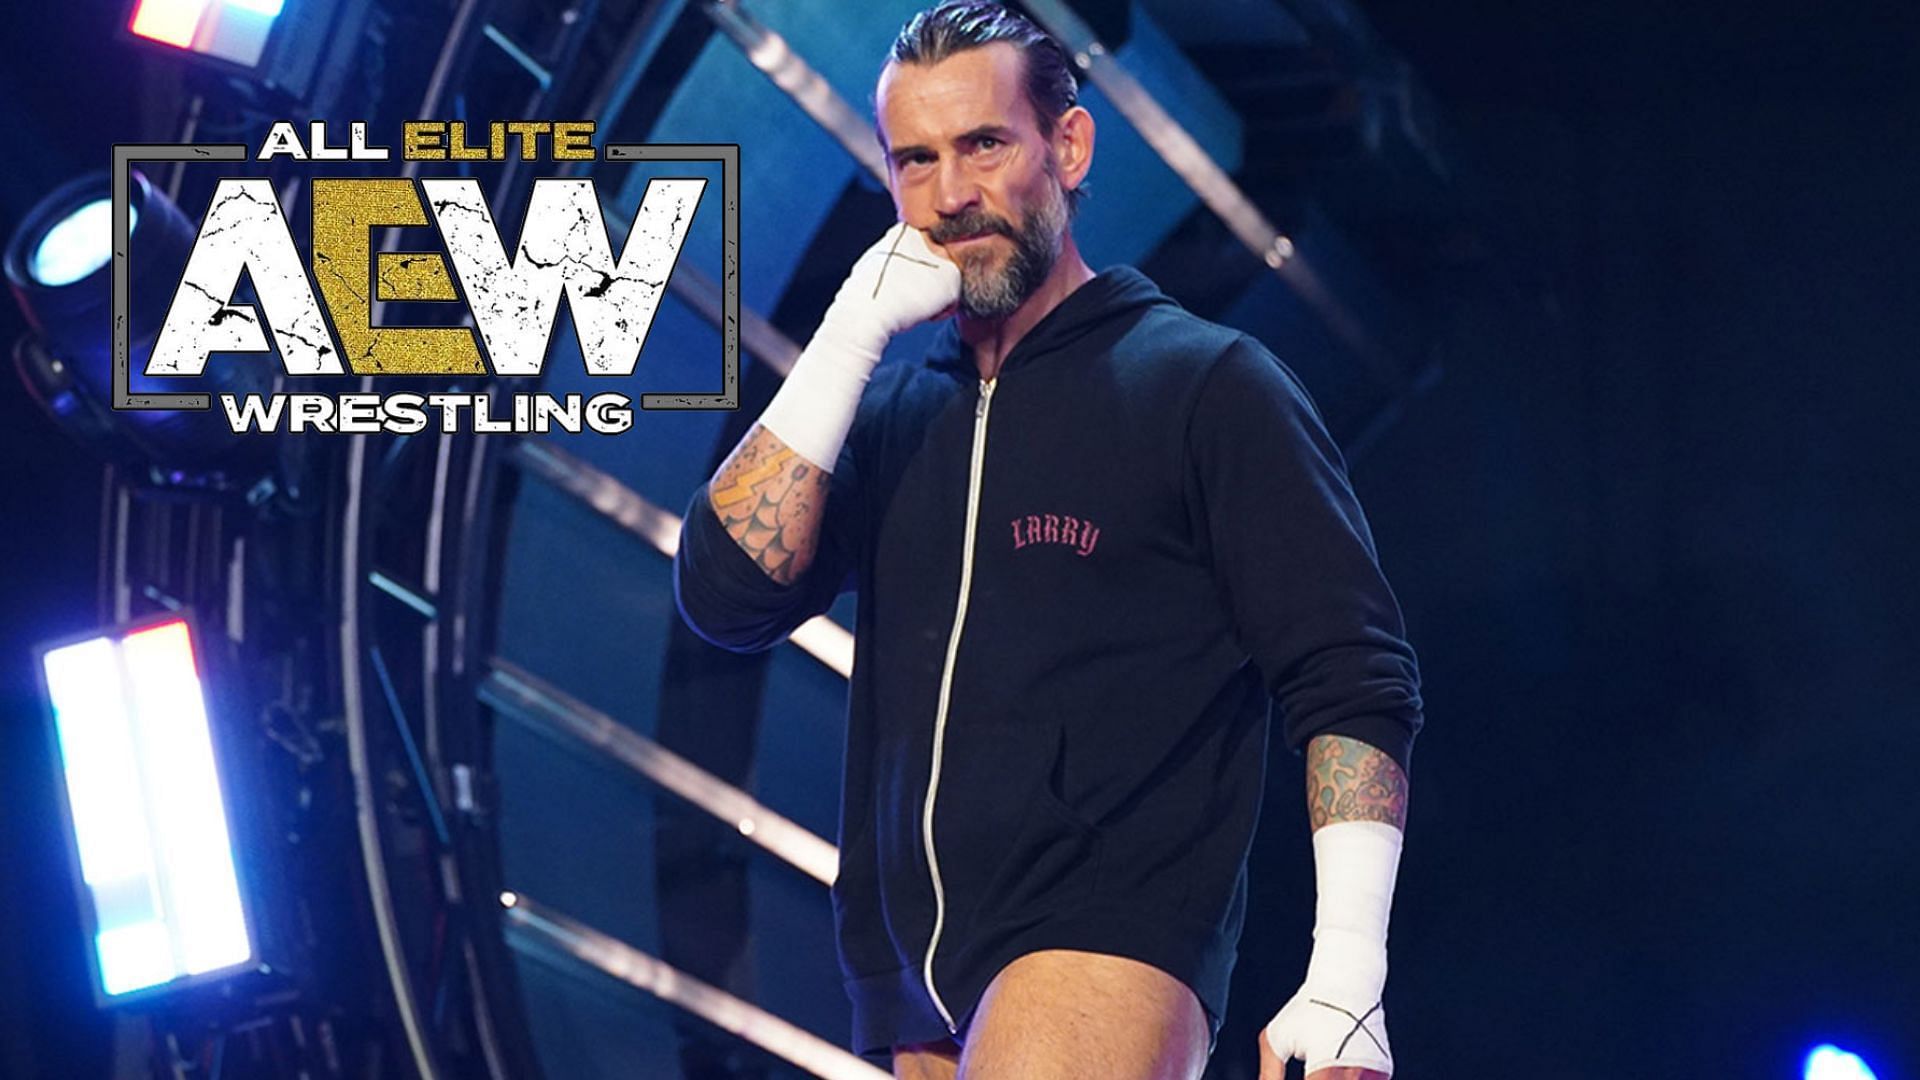 CM Punk is still missing from the AEW programming.